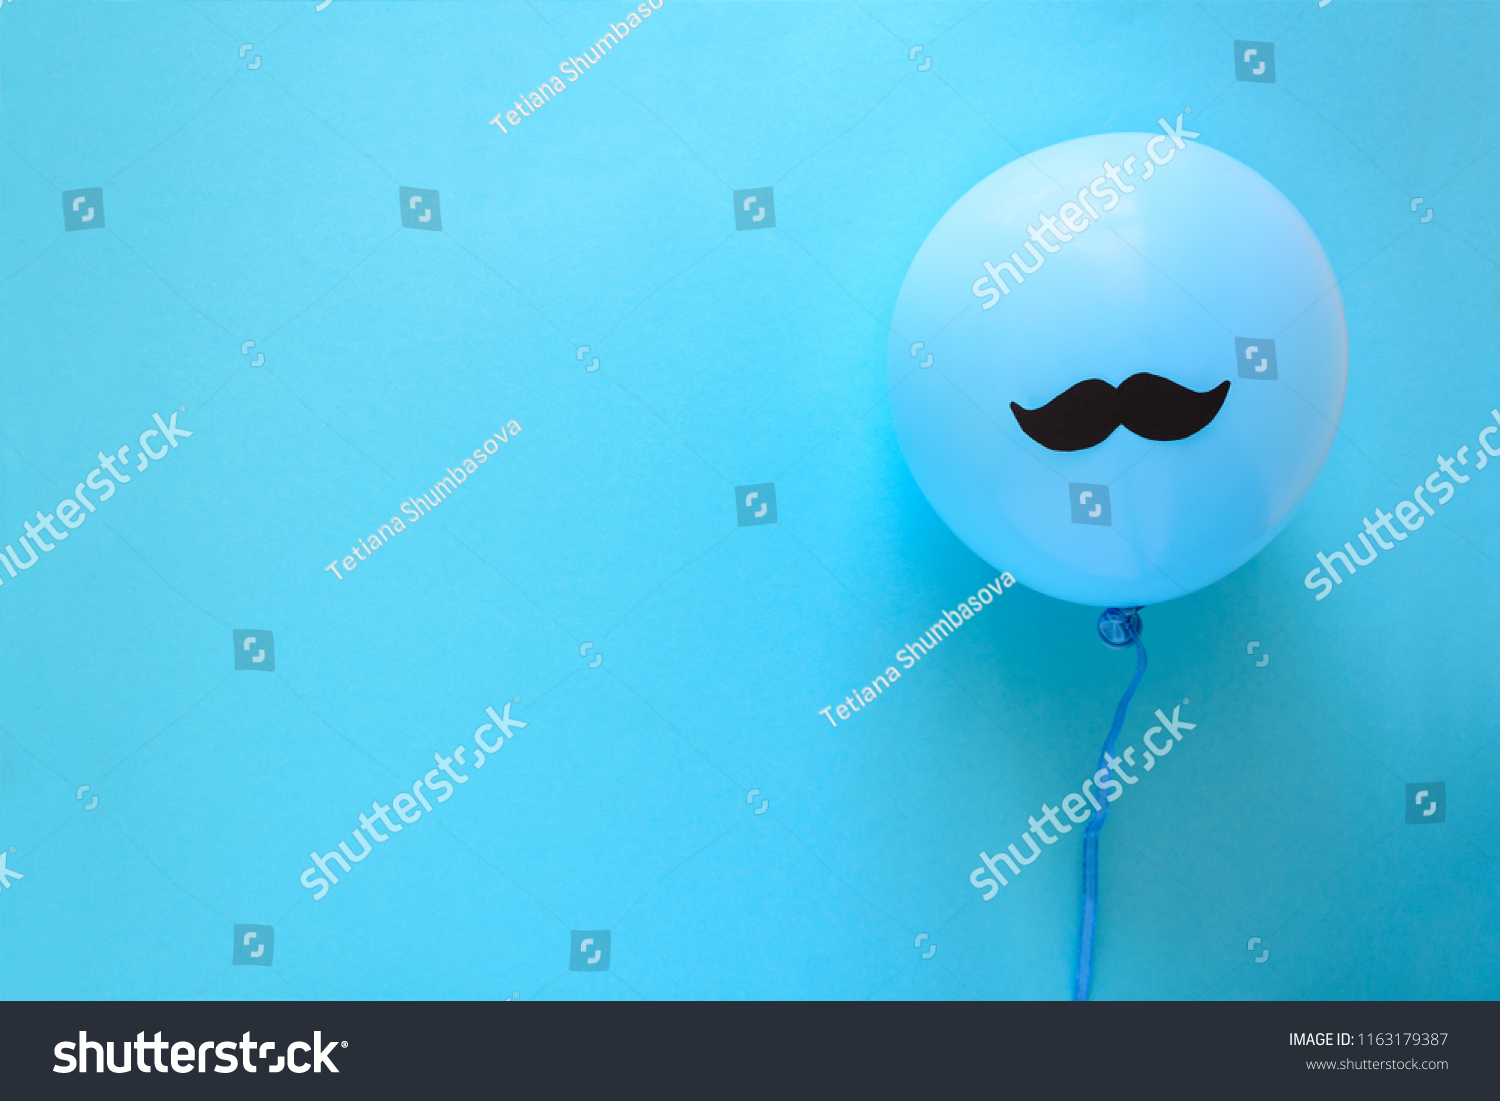 Hand holding blue balloon with a paper mustache on blue paper background. Cut out style. Father's day or mustache day concept. Top view. Flat lay. Copy space #1163179387